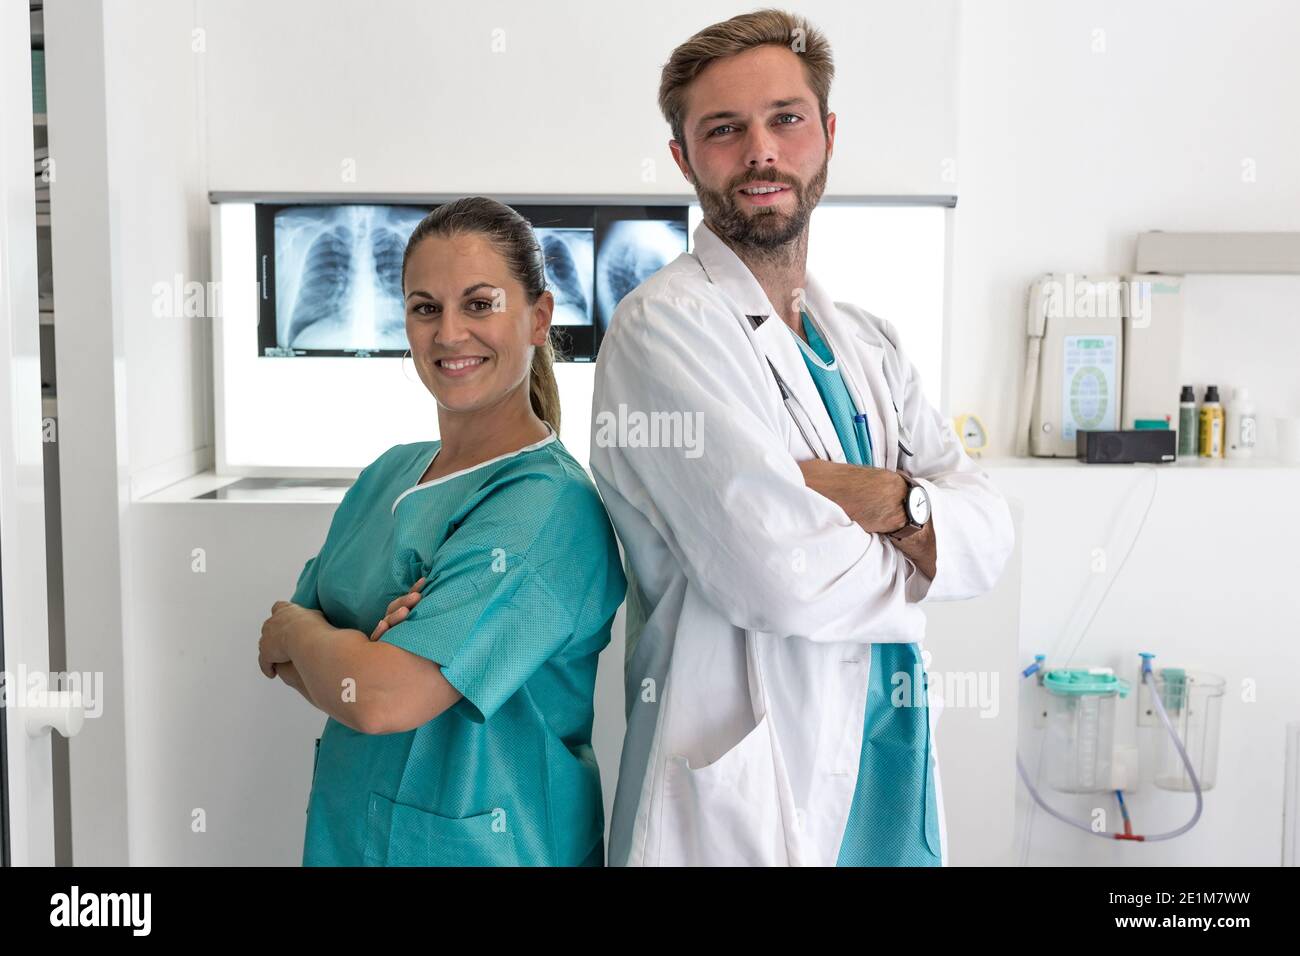 portrait of a young medical people smiling - isolated on blurred medical background with copy space Stock Photo